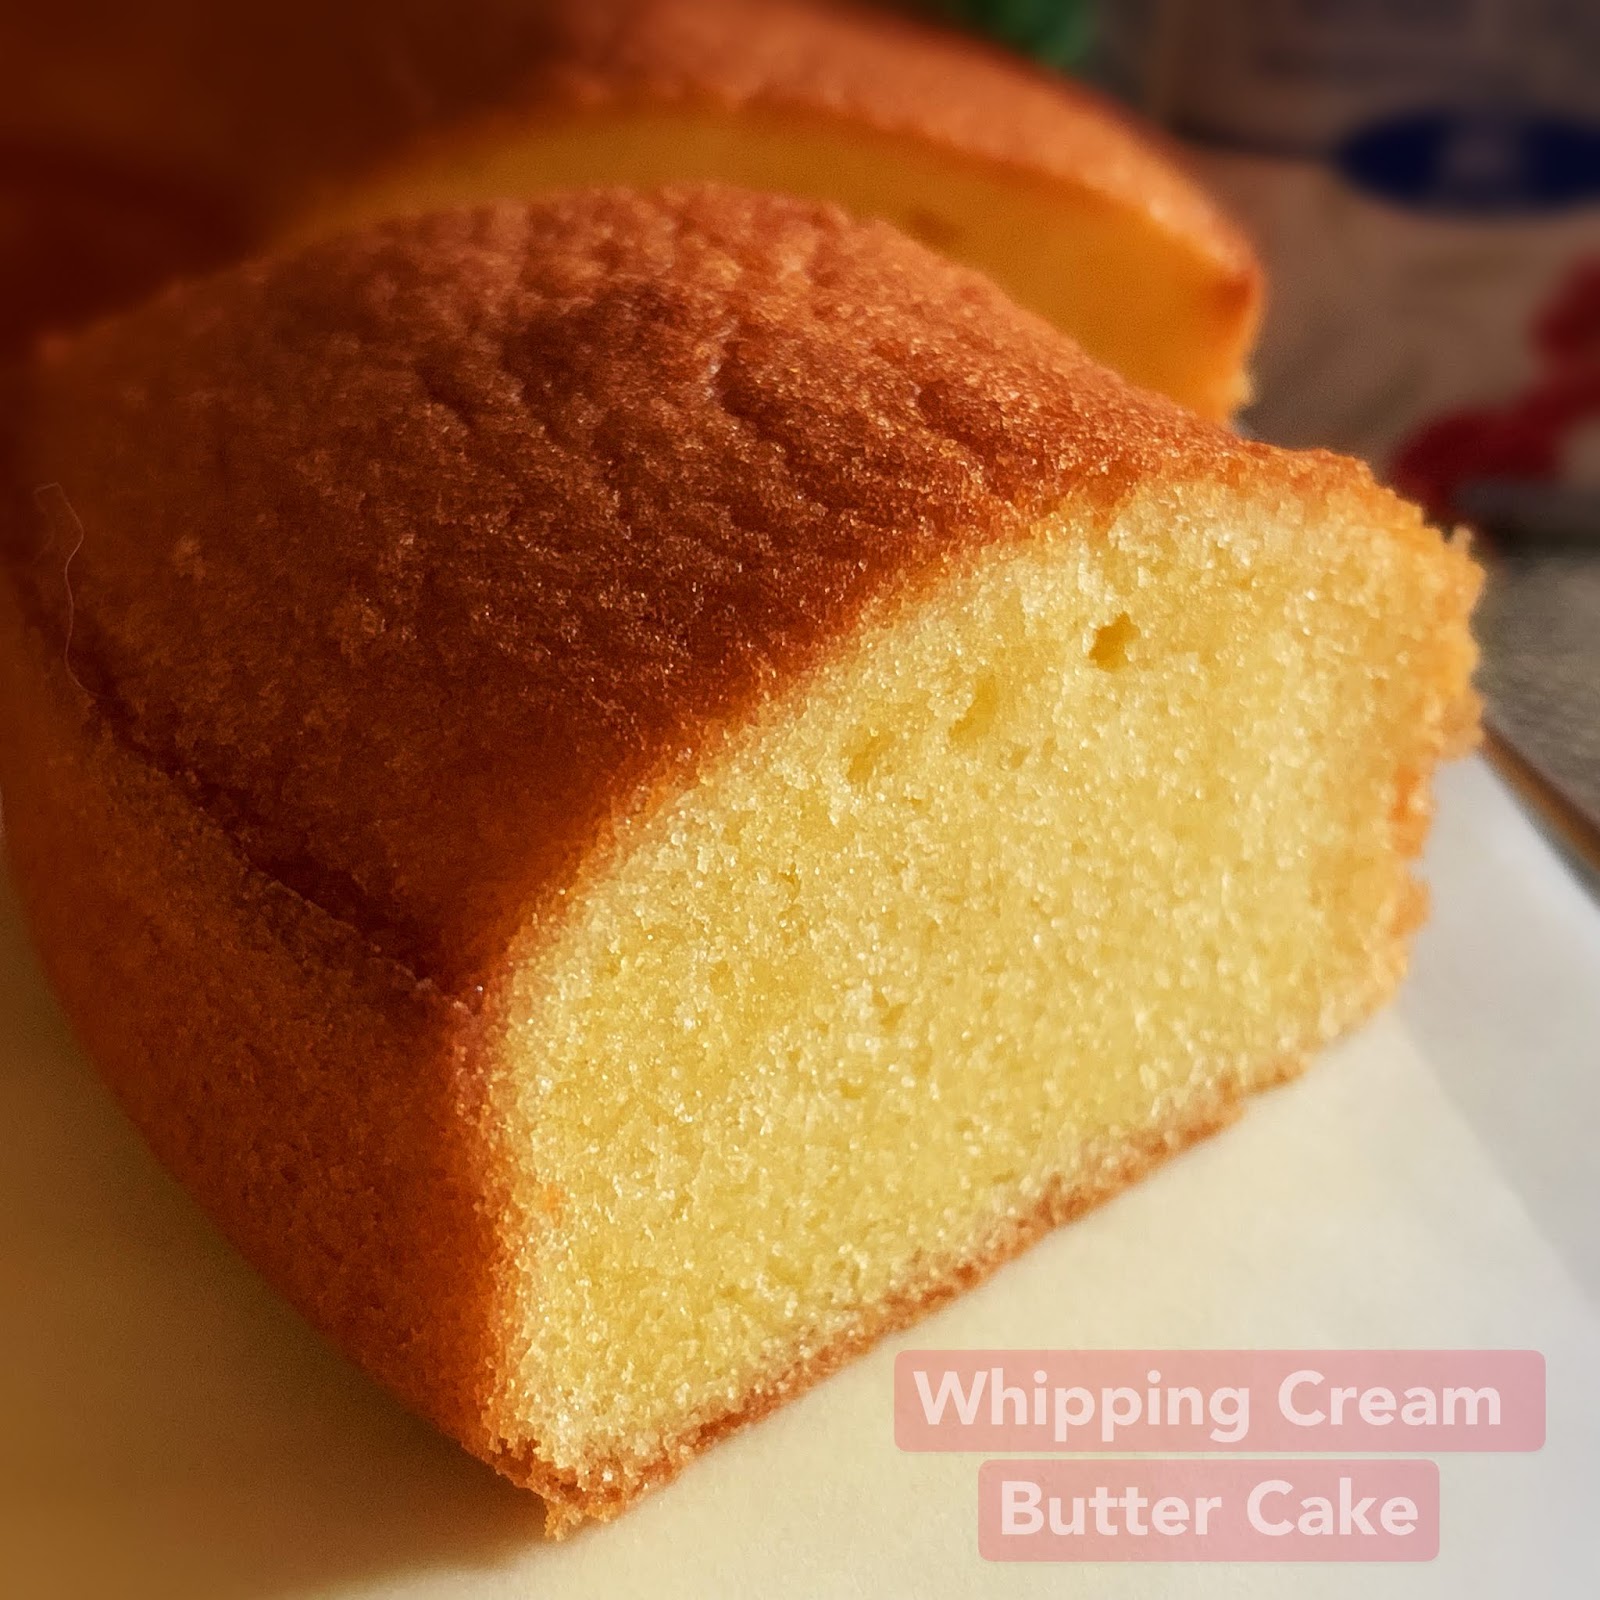 My Mind Patch Whipping Cream Butter Cake